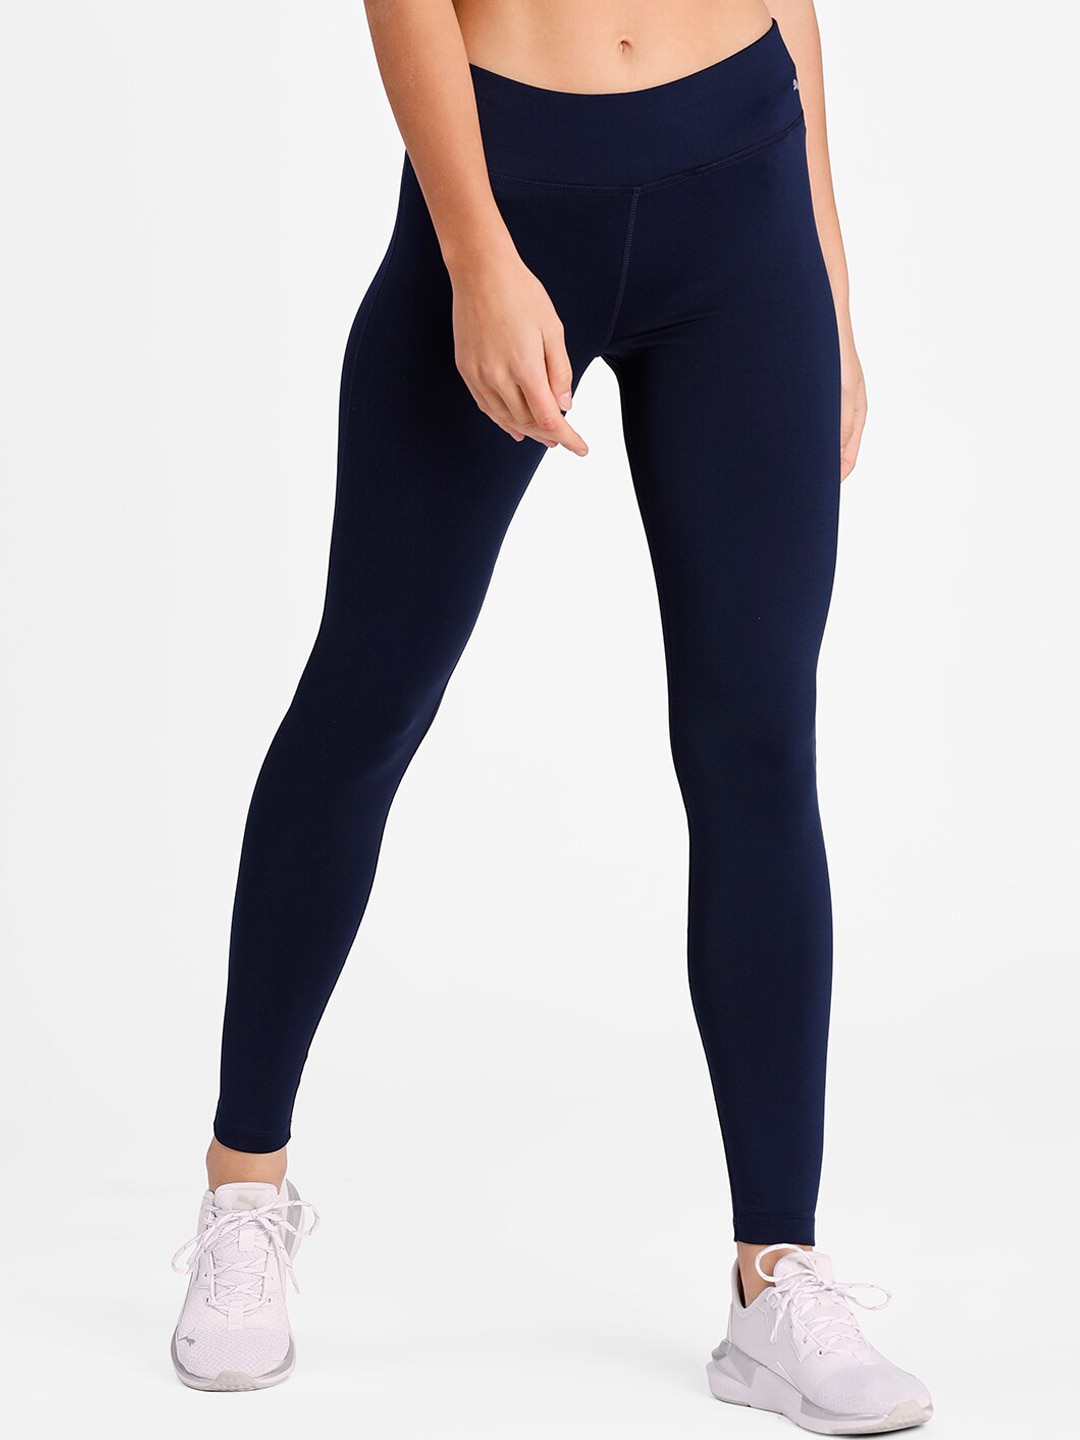 Puma Women Navy Blue Solid Performance Full-Length Training Tights Price in India